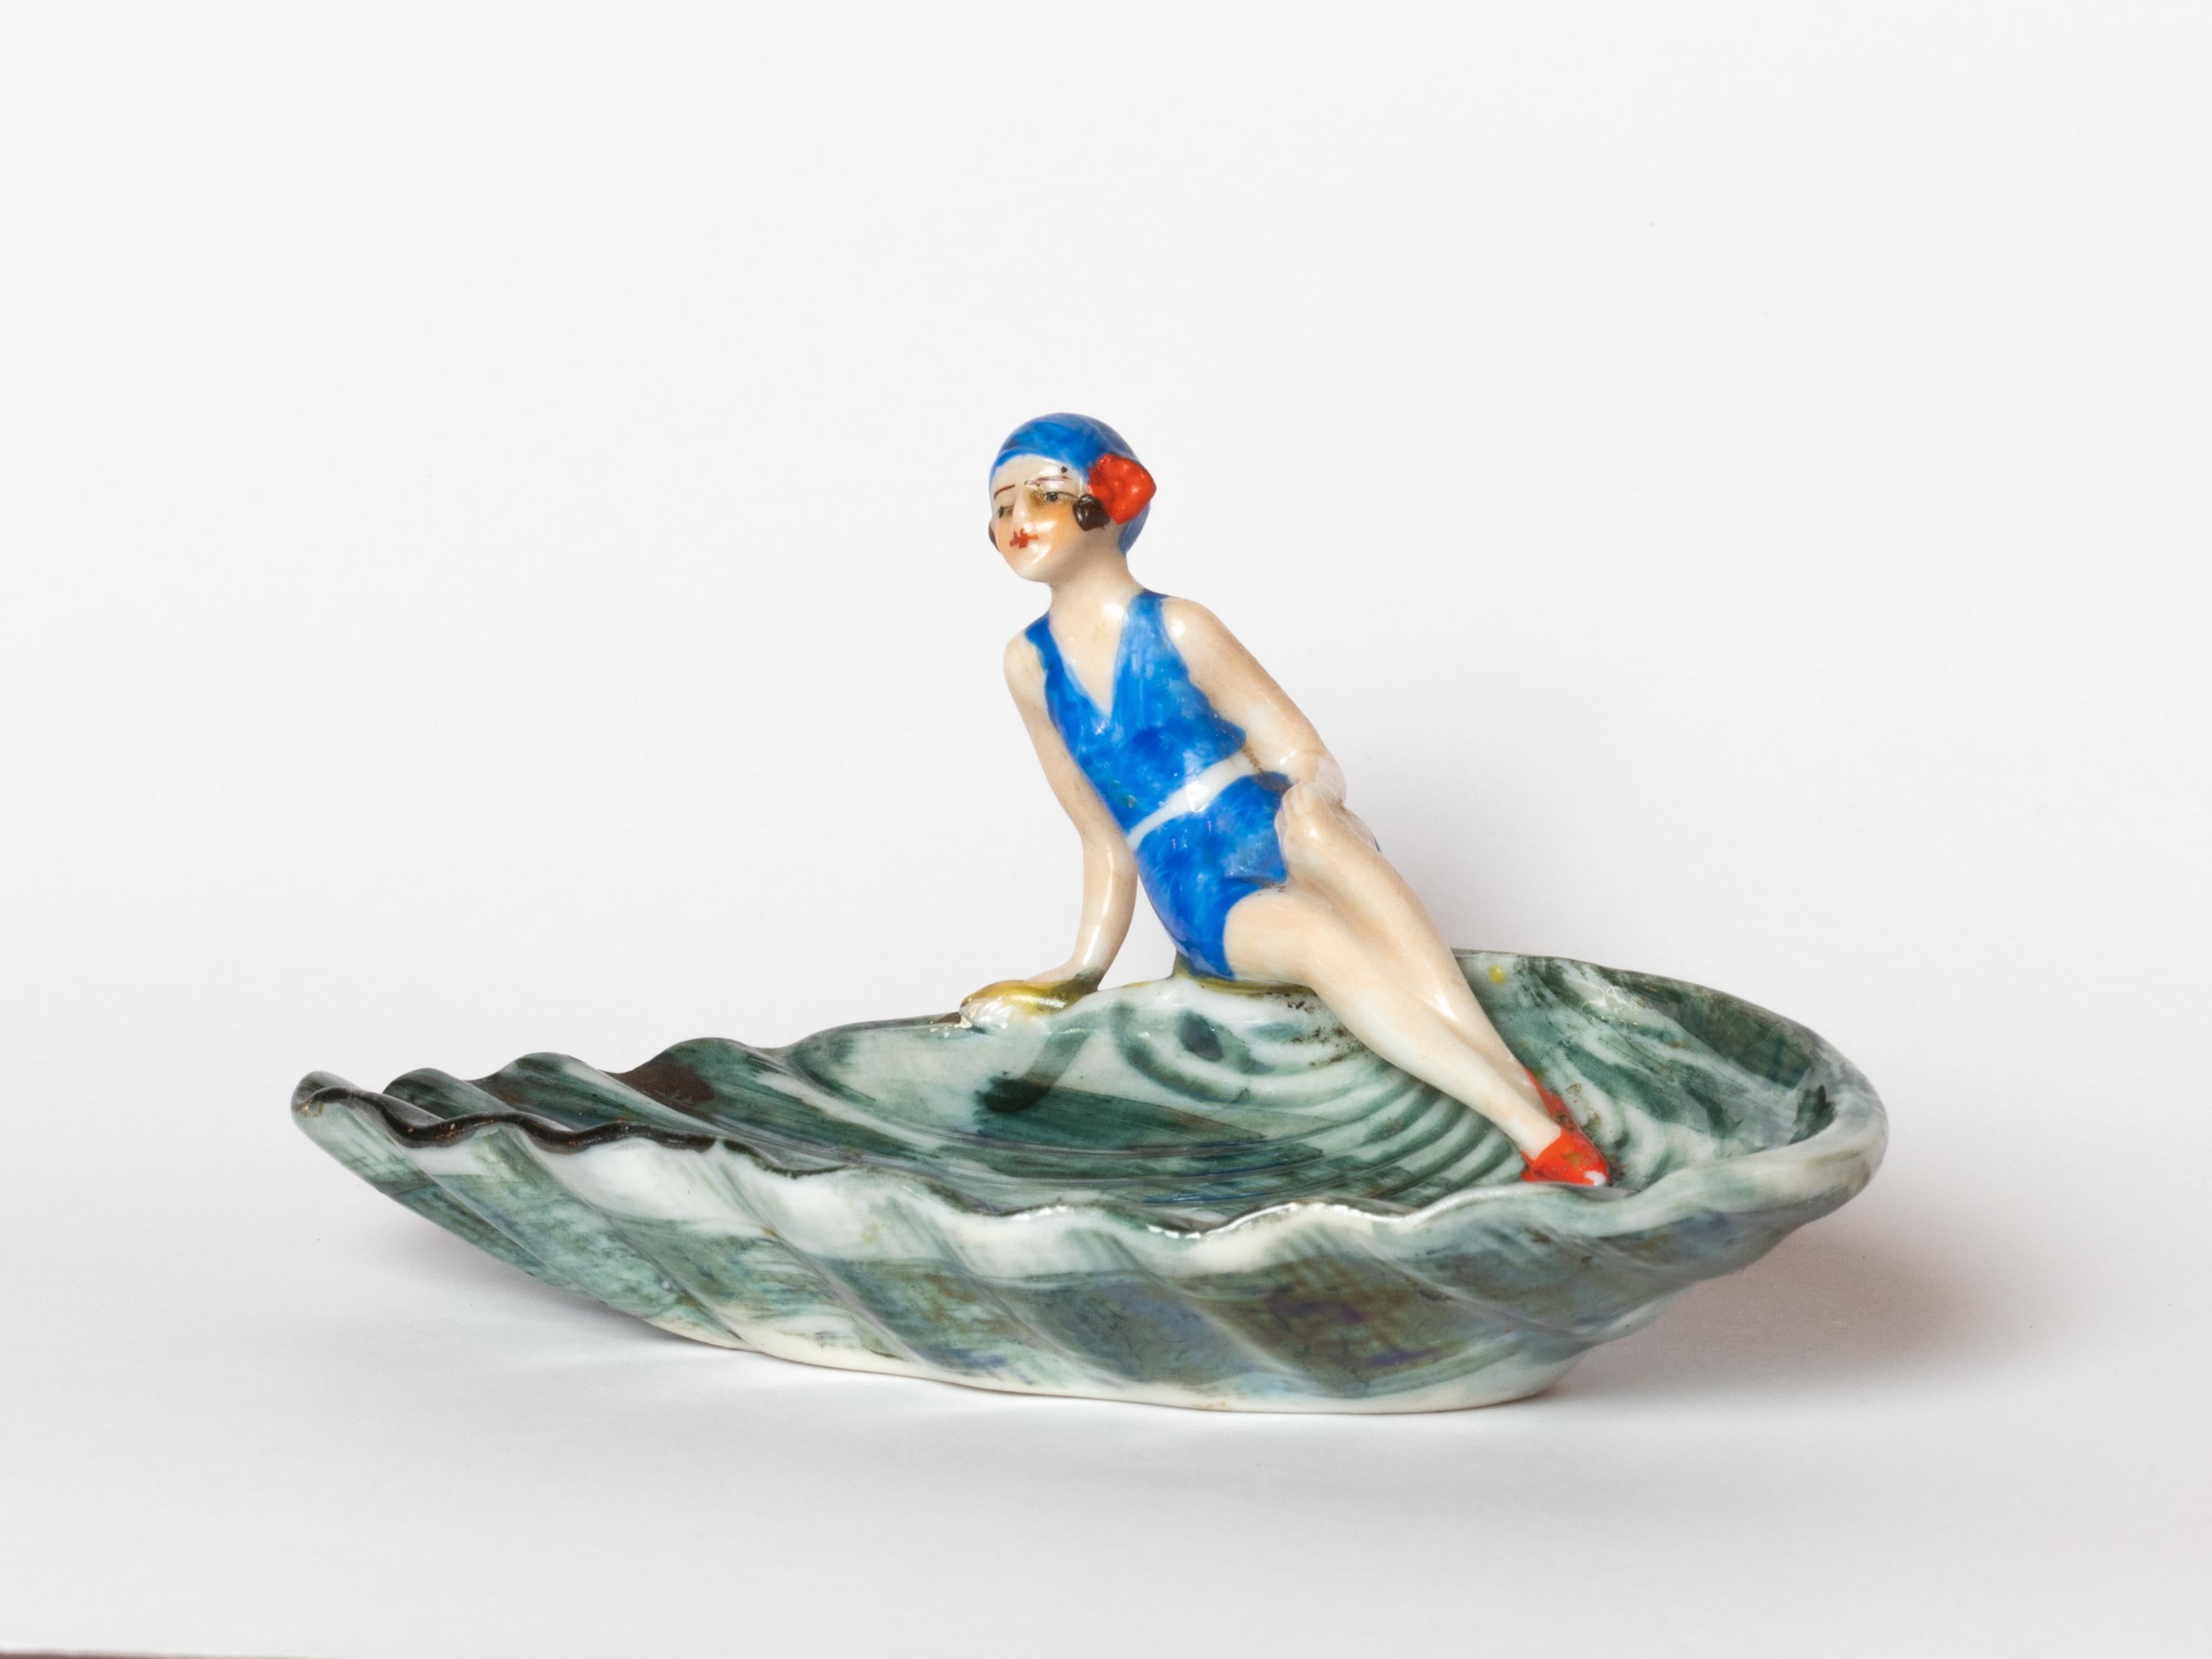 A nacre color figurine miniature in porcelain of a bathing lady in shell / Pin Up
girl - style Baigneuse / Petite baigneuse by W Goebel of Rodental Bavaria.

9607 marked on the piece.